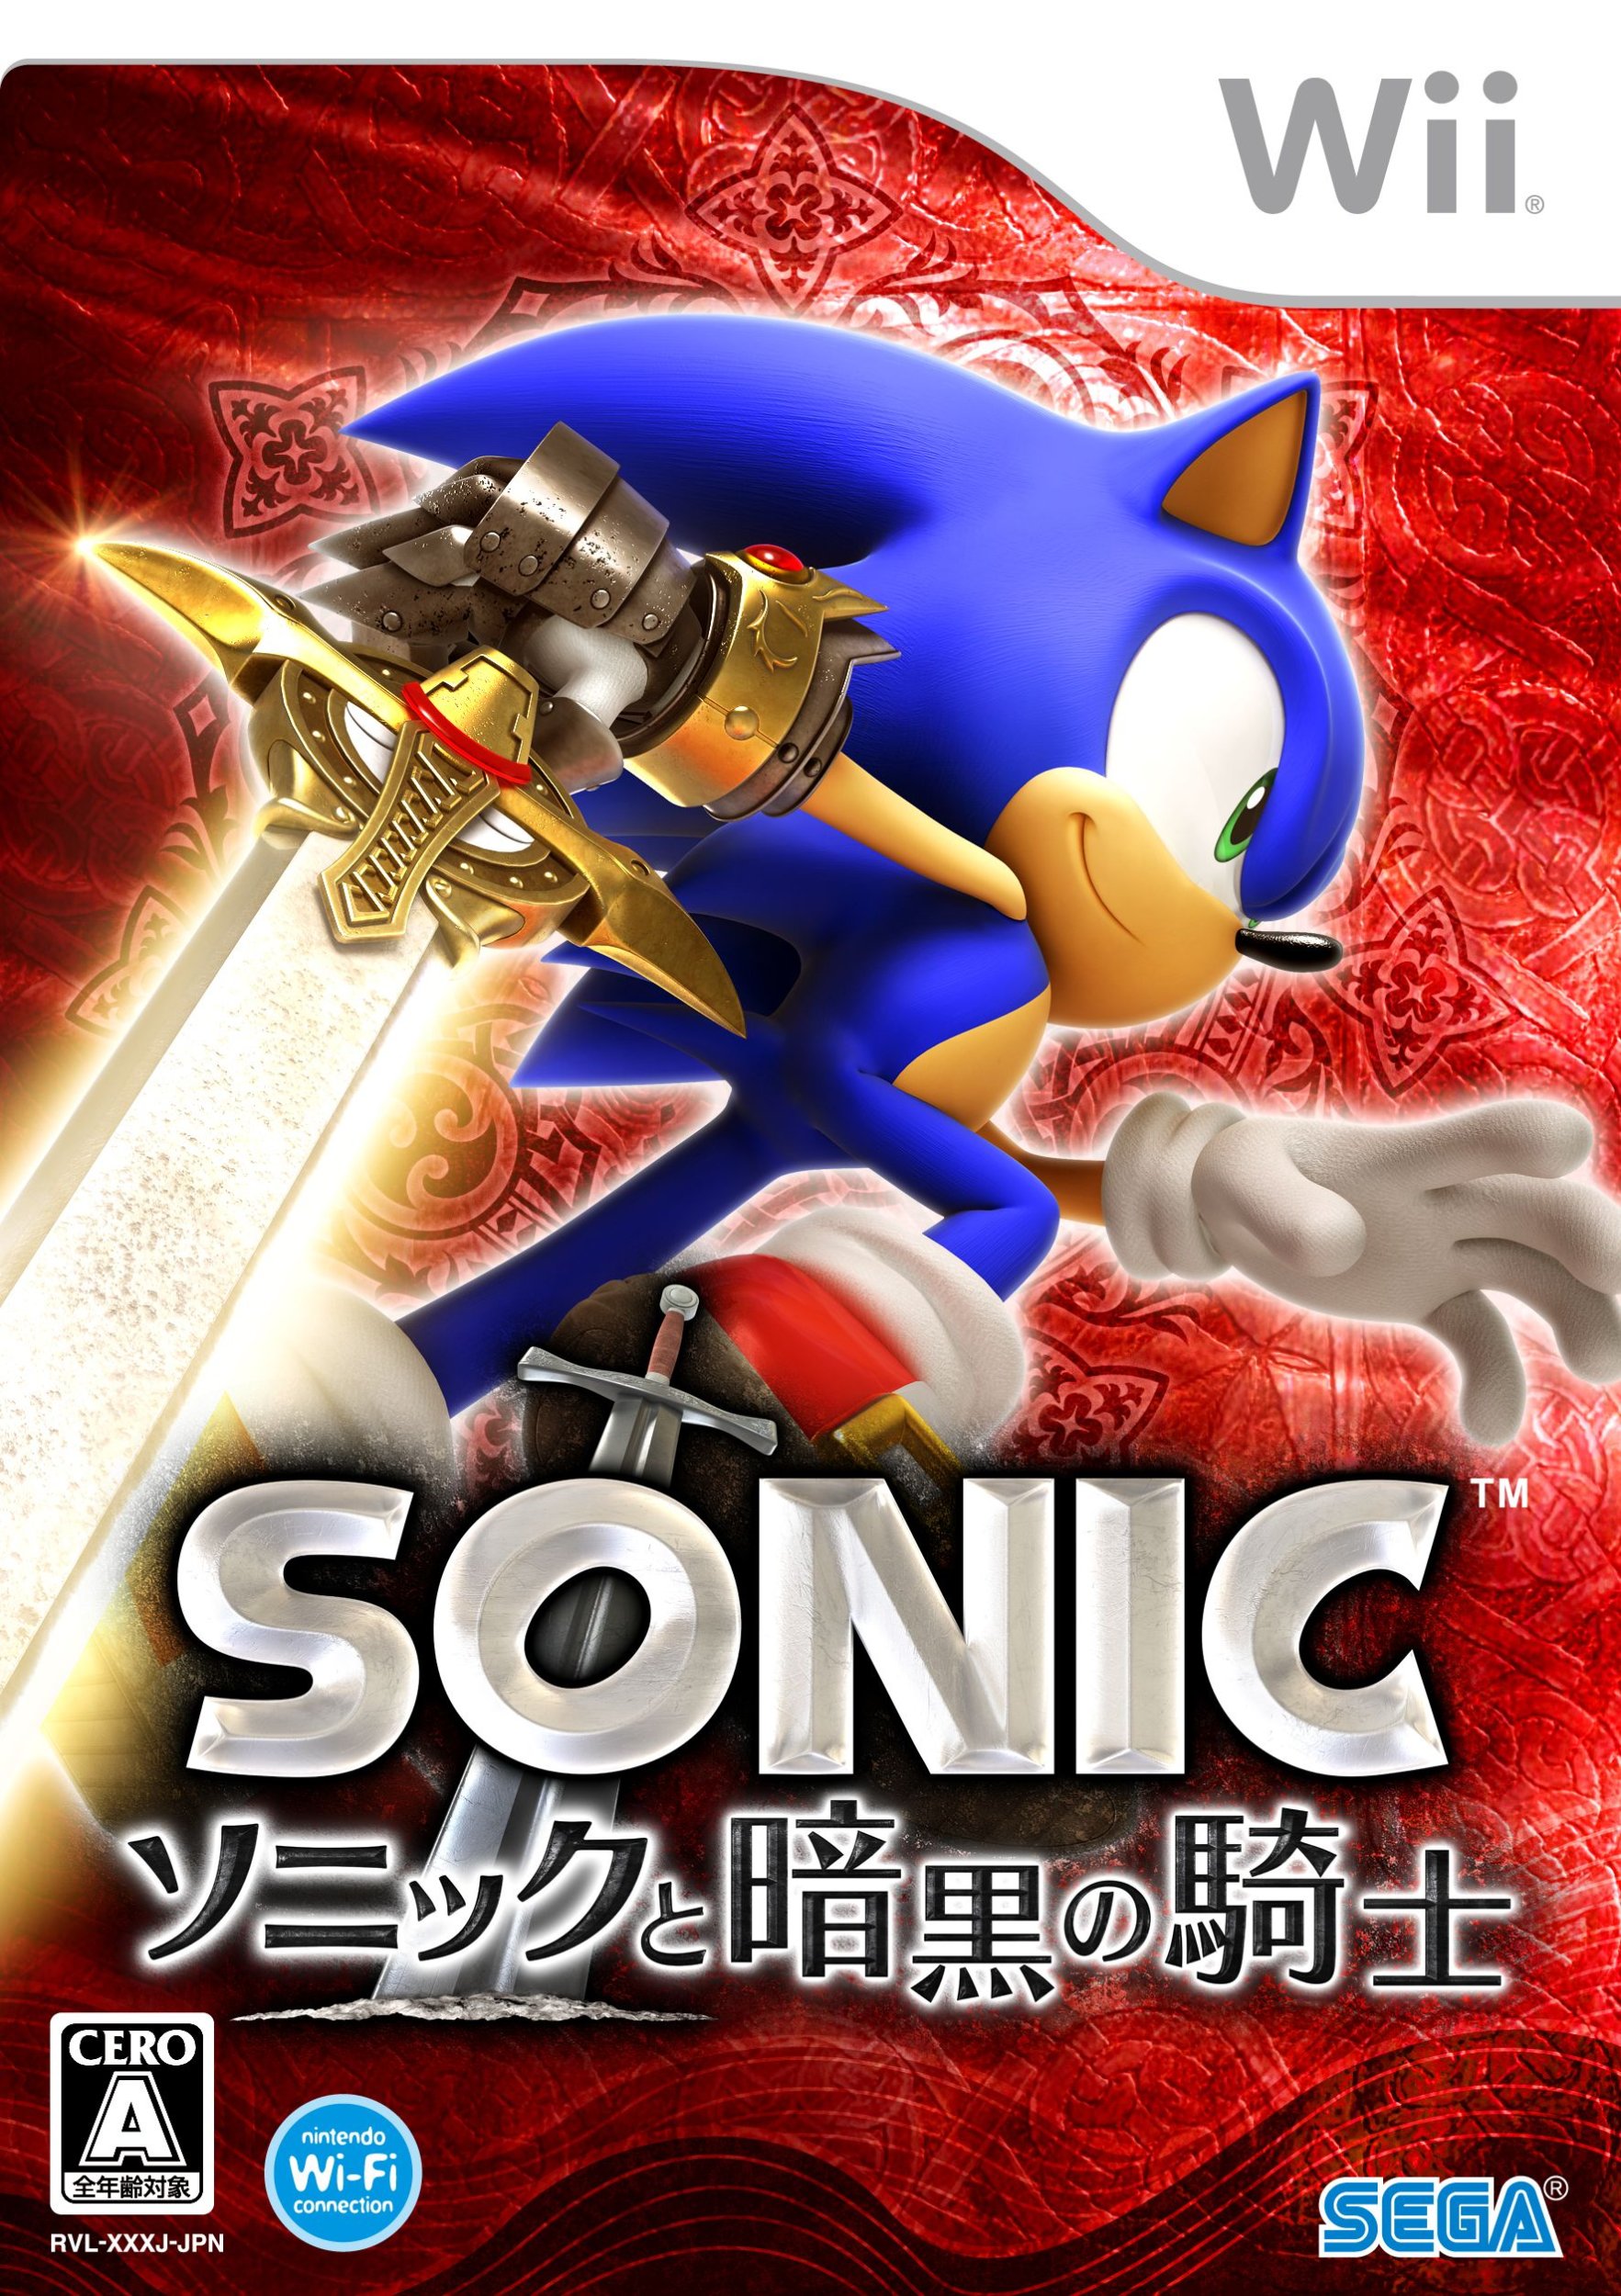 wii sonic